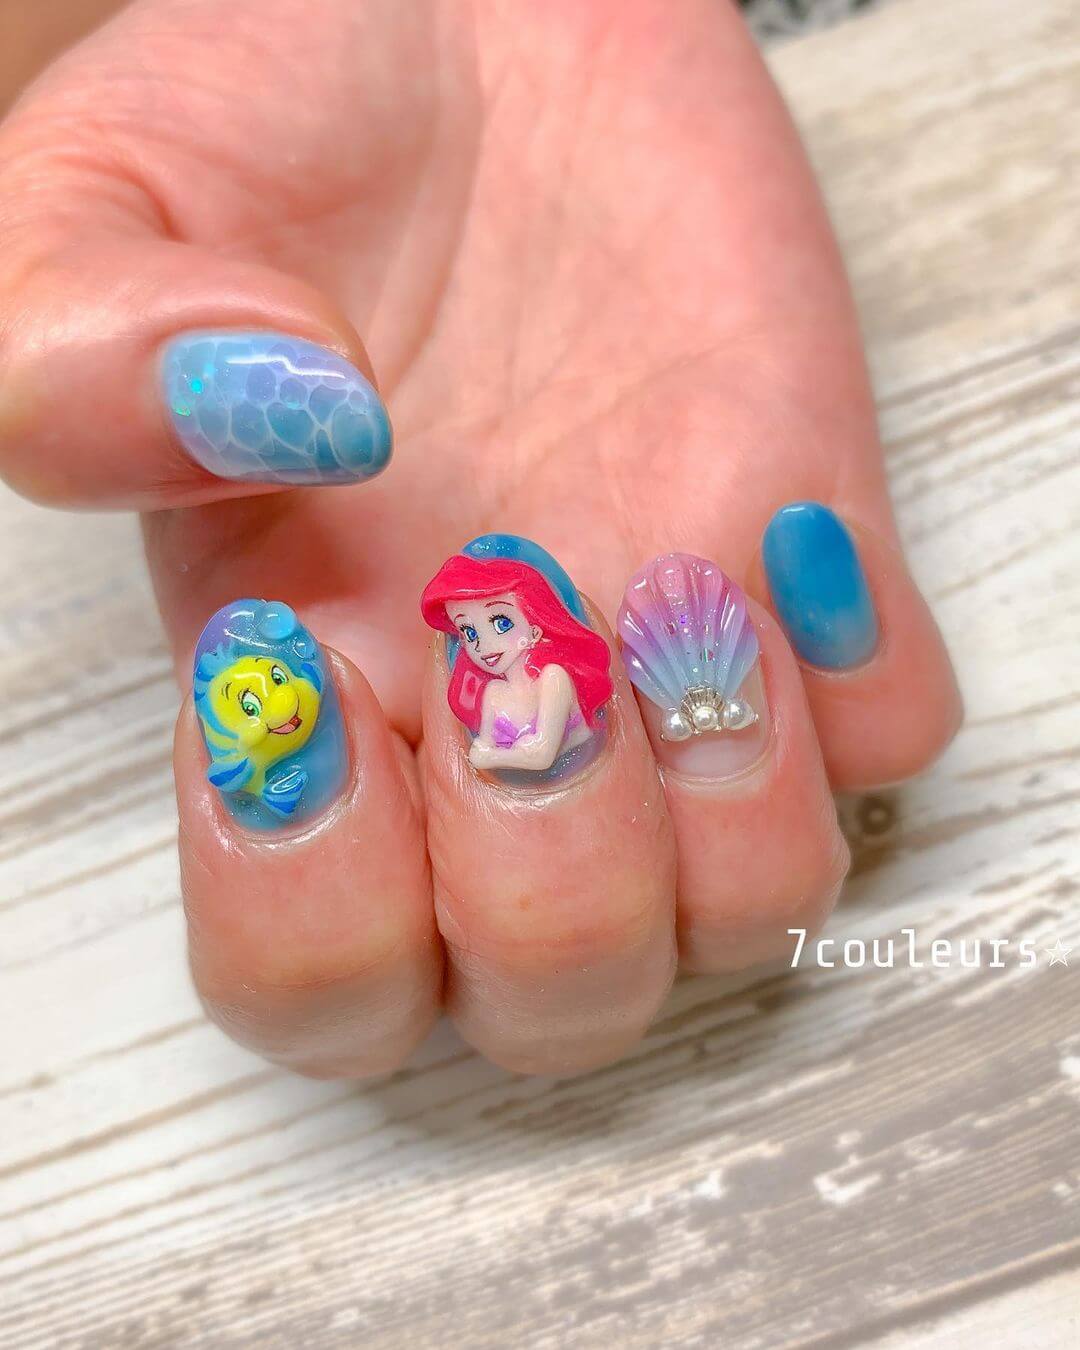 Mermaid Nail Art Designs For The Love Of The Little Mermaid